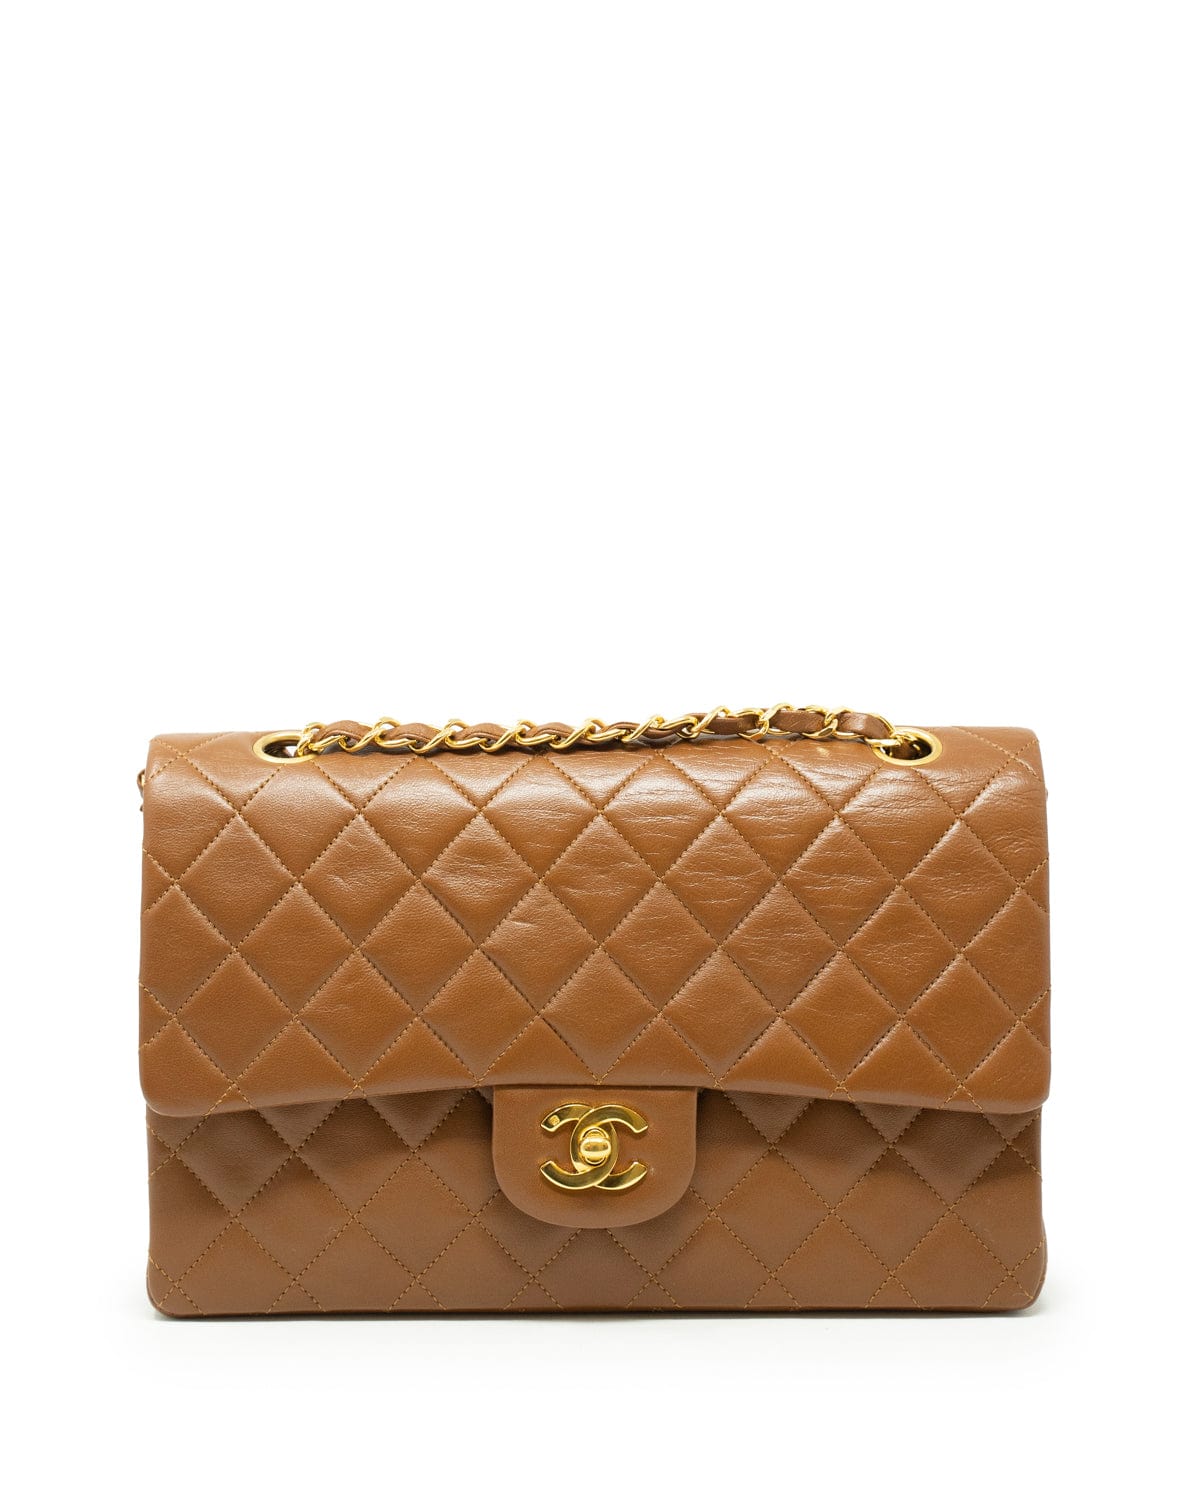 Chanel medium classic flap in caramel with 24k gold gilded